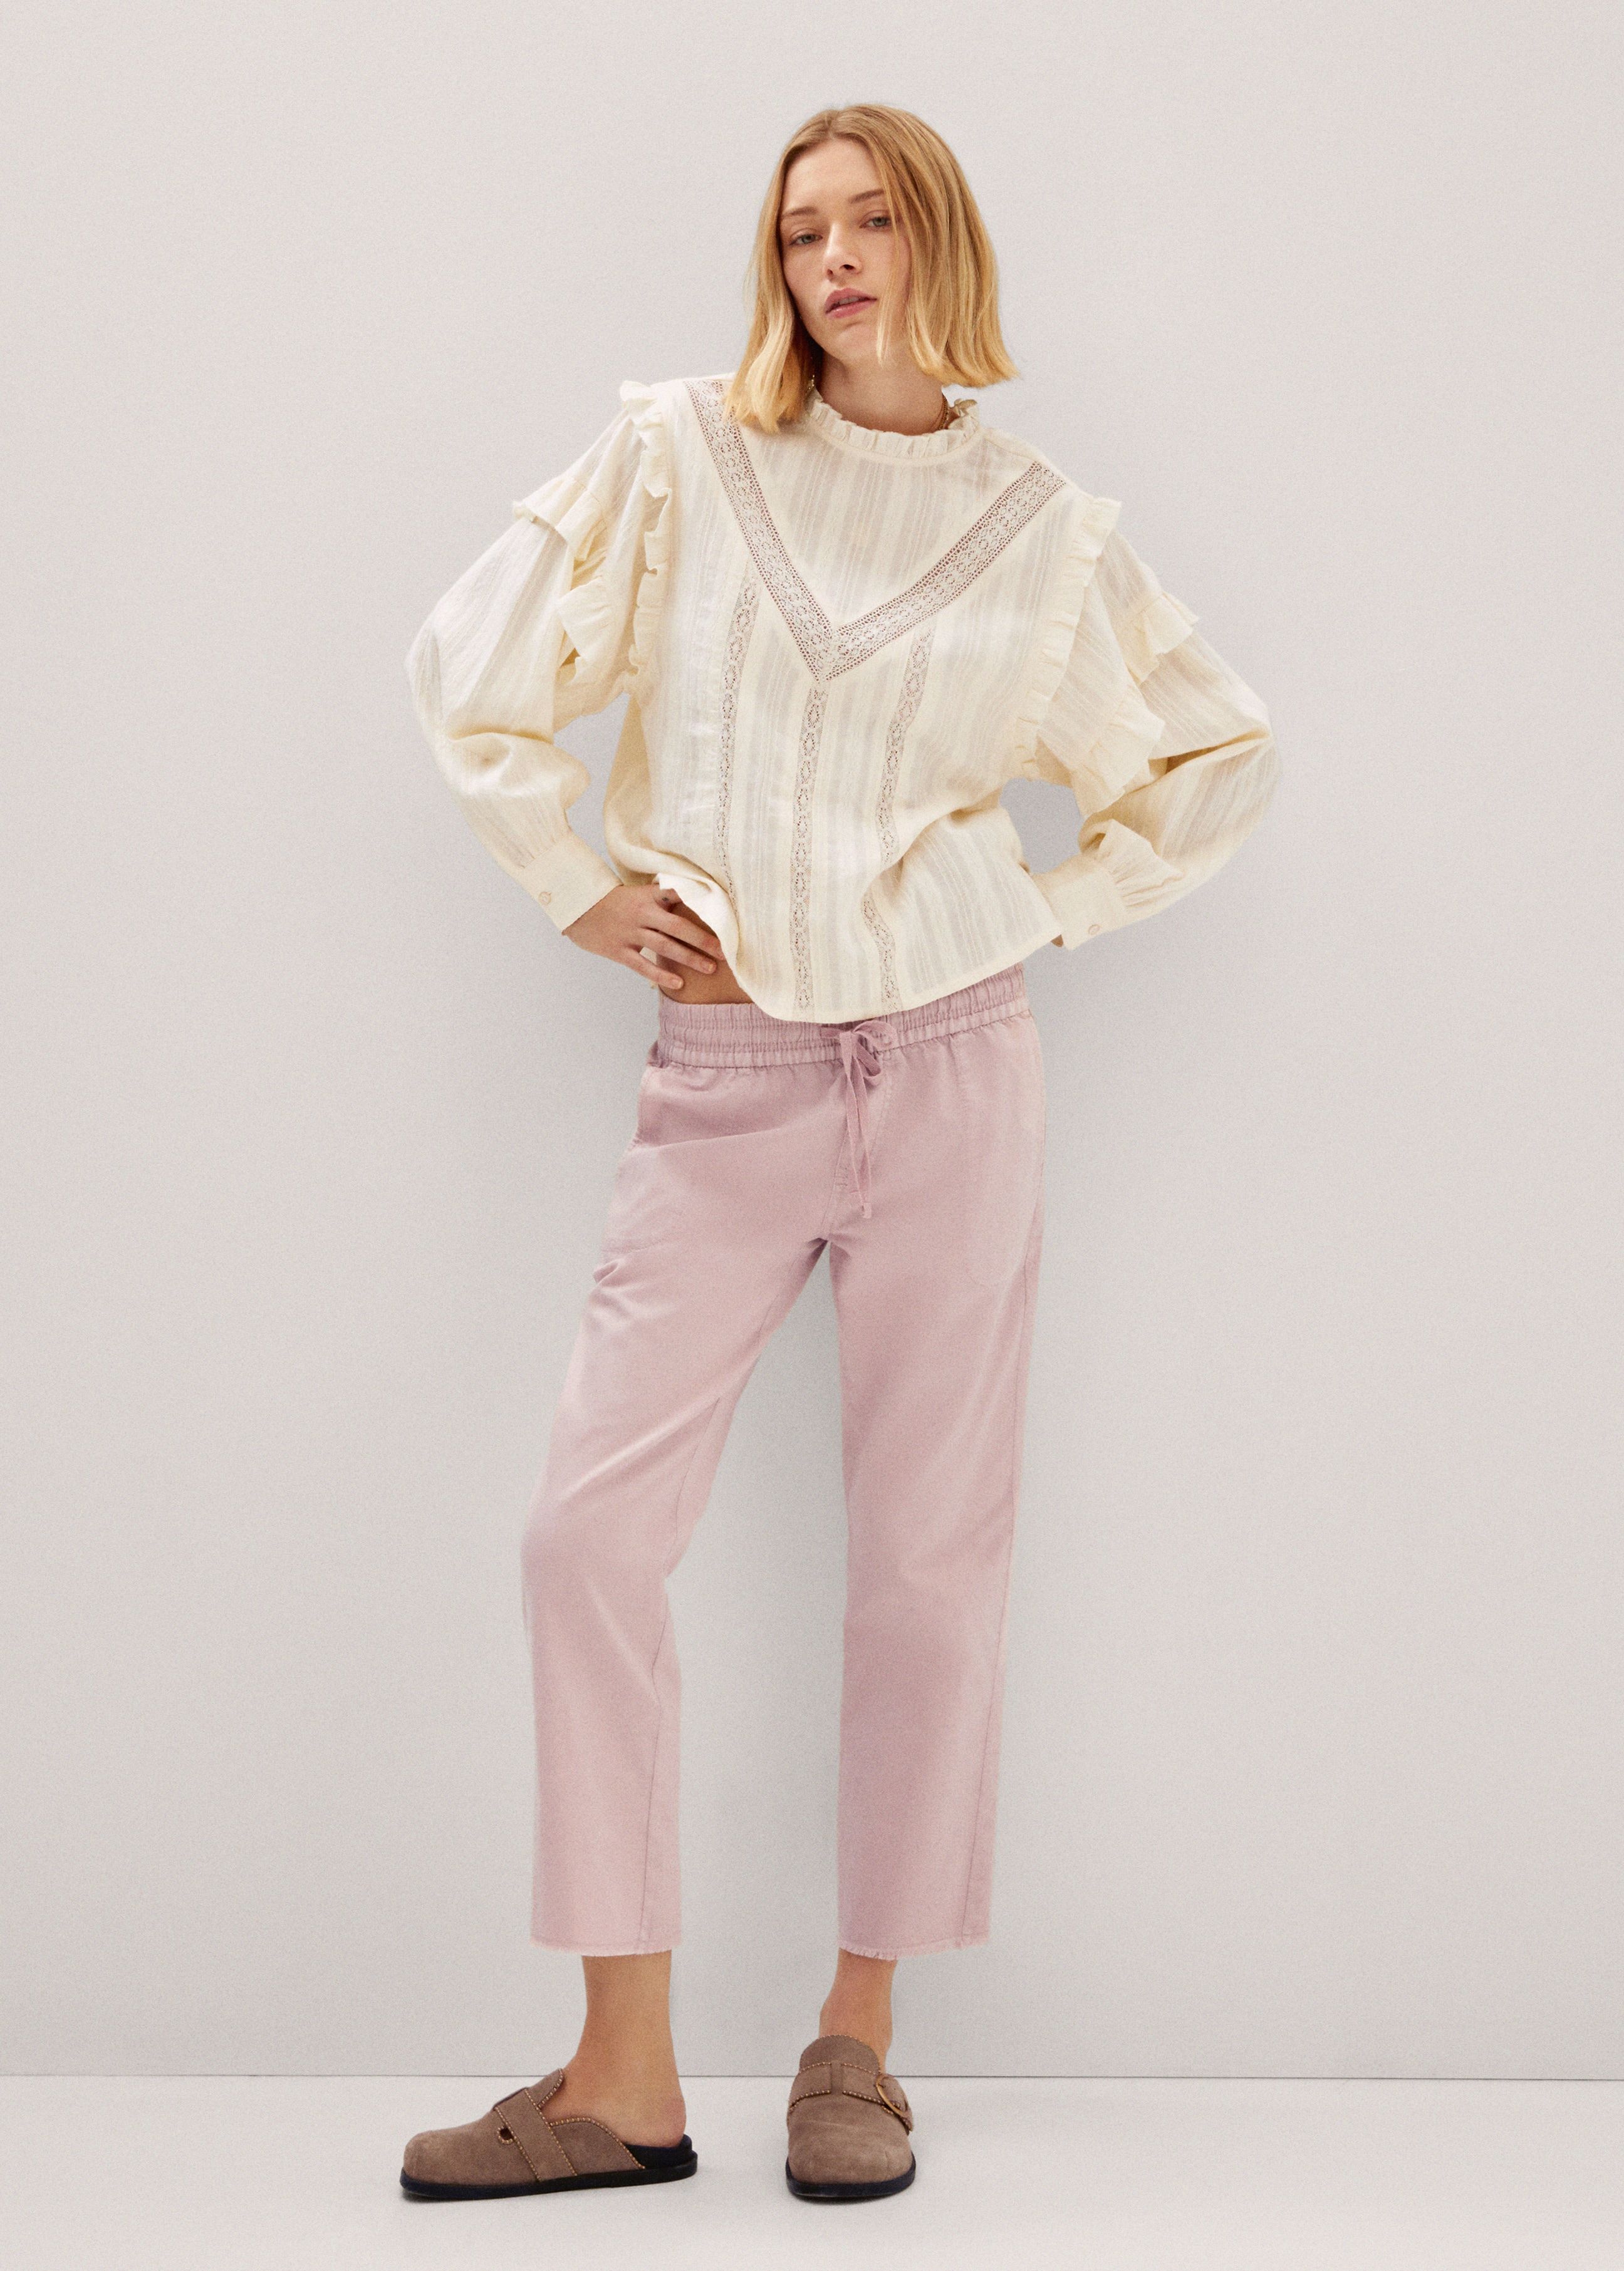 Ruffled embroidered blouse - General plane